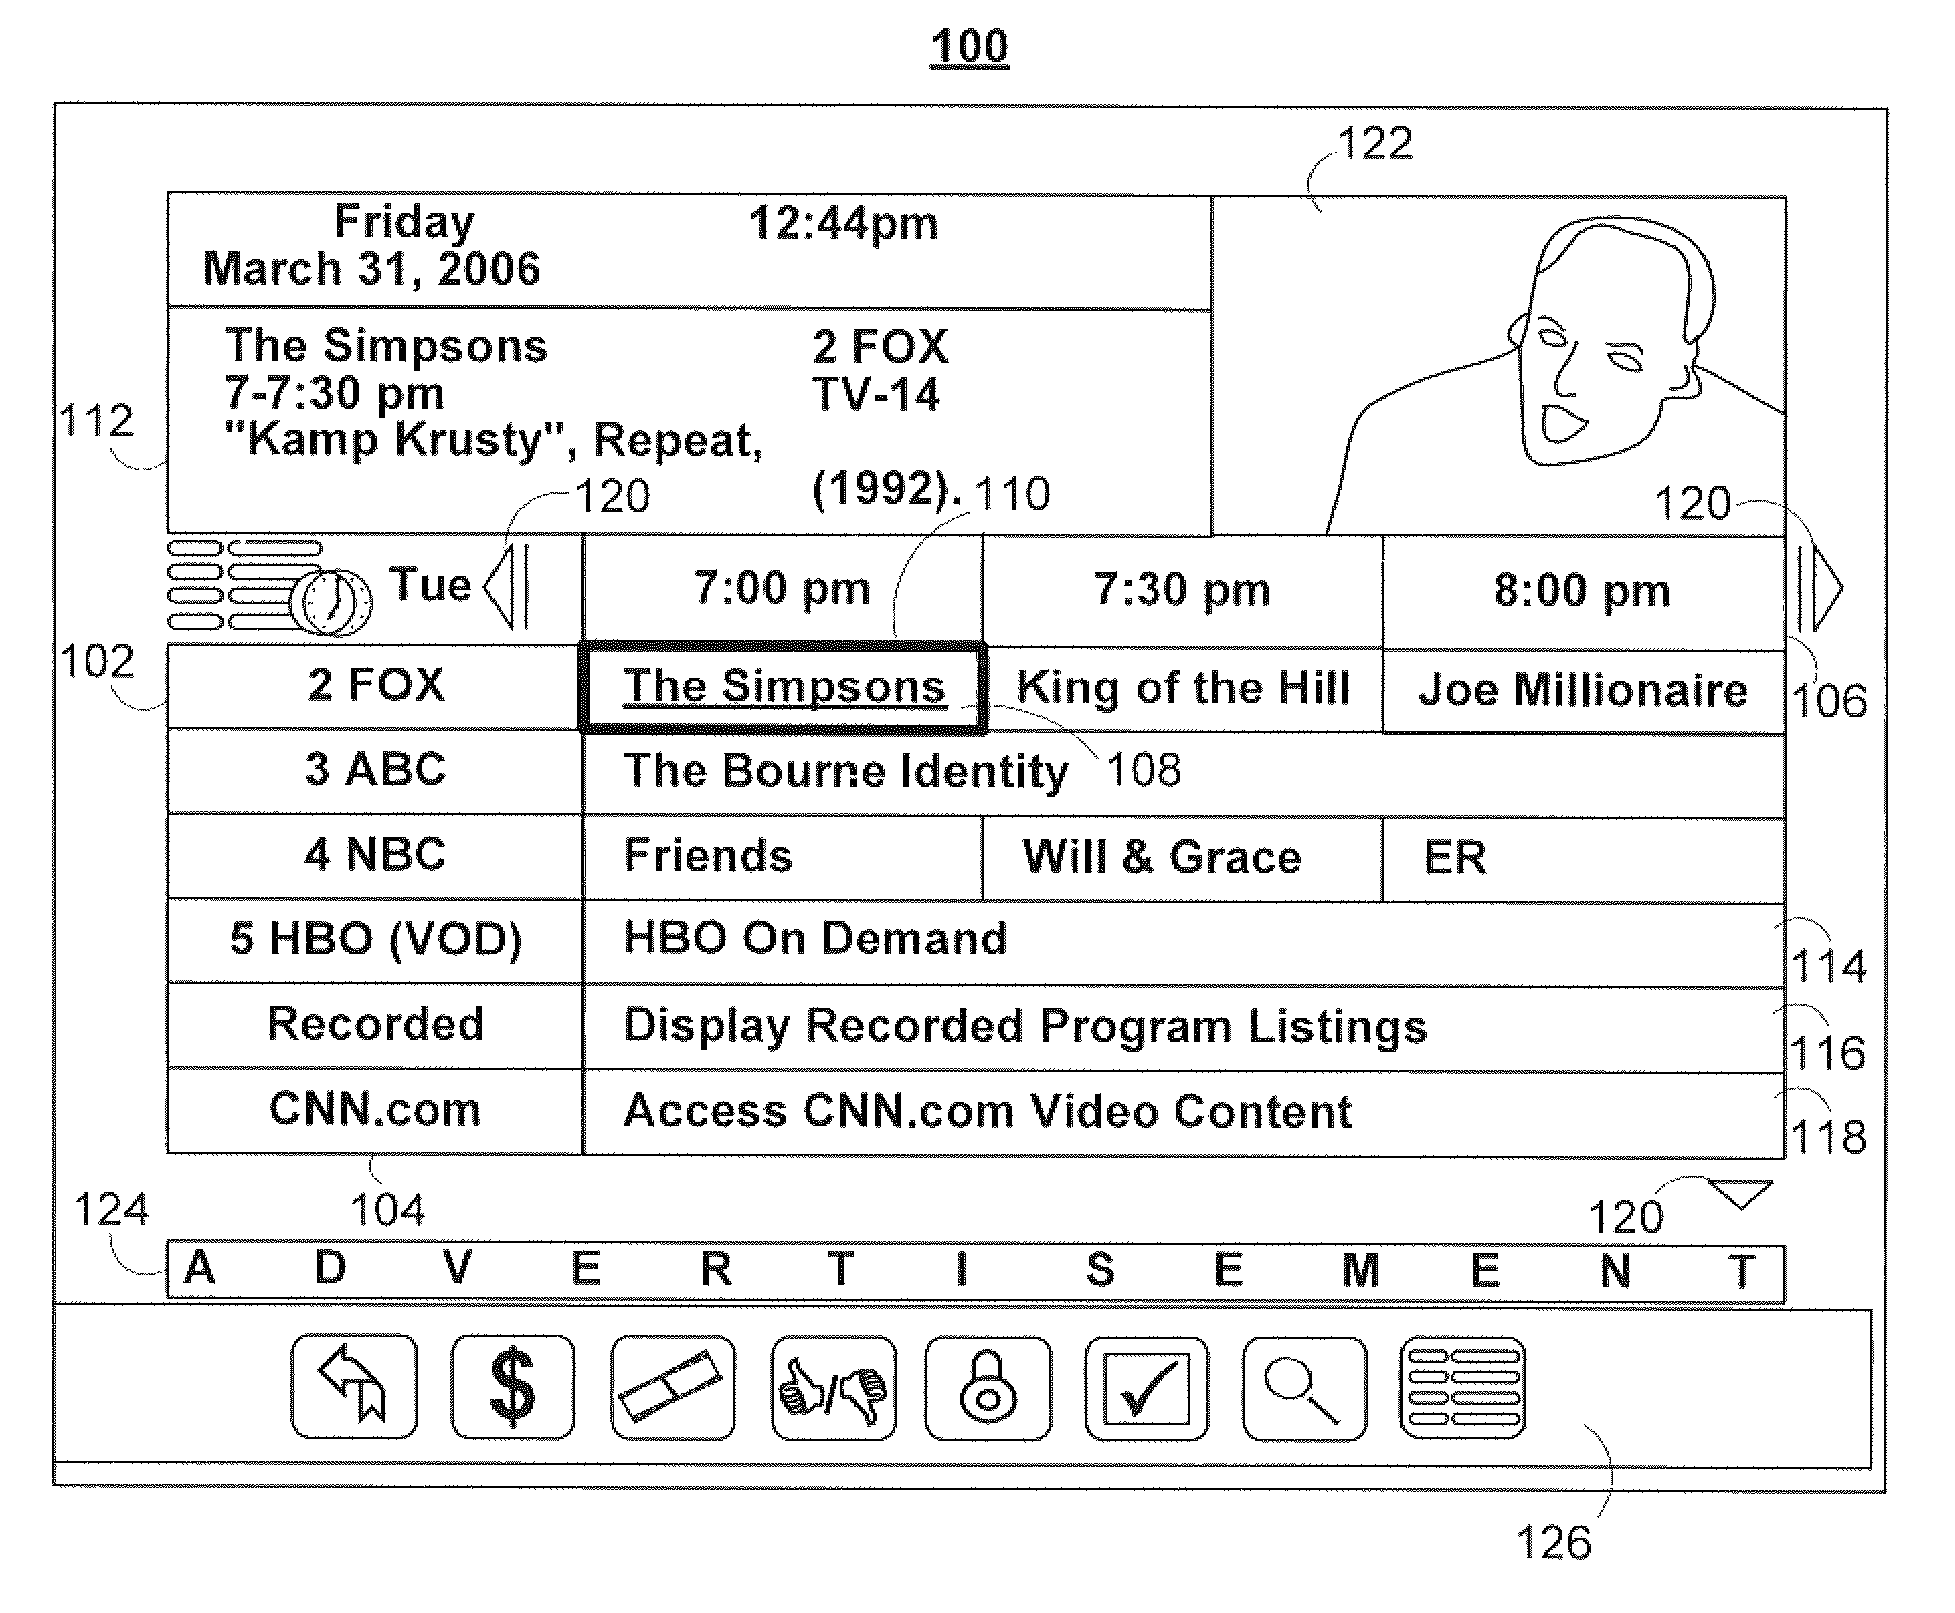 Systems and methods for automatically detecting users within detection regions of media devices